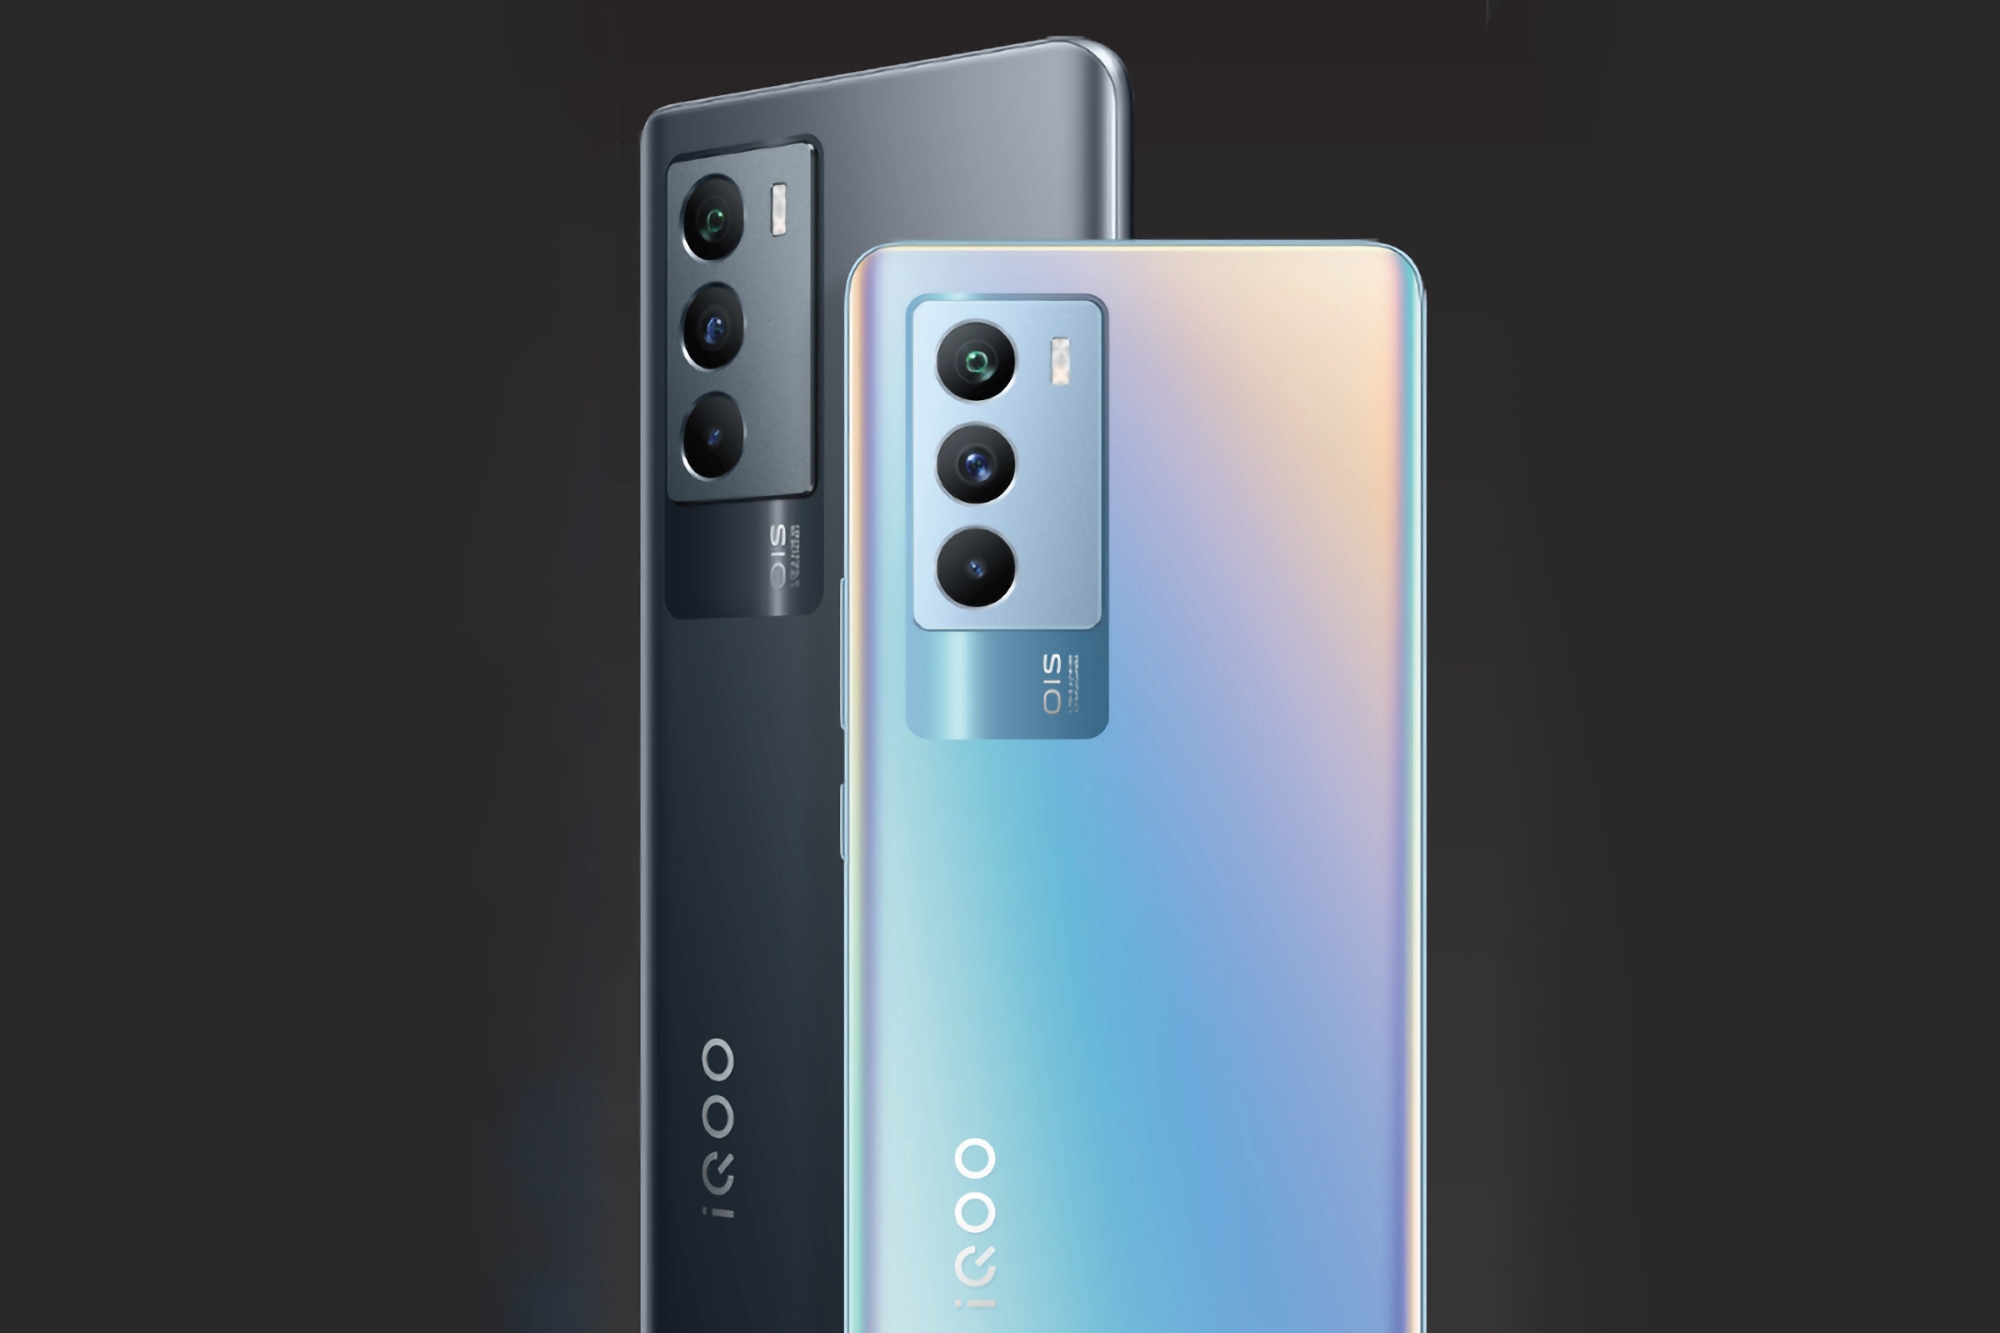 iQOO 9 SE: 120Hz AMOLED screen, Snapdragon 888 chip, 48MP triple camera, 66W charging for $455